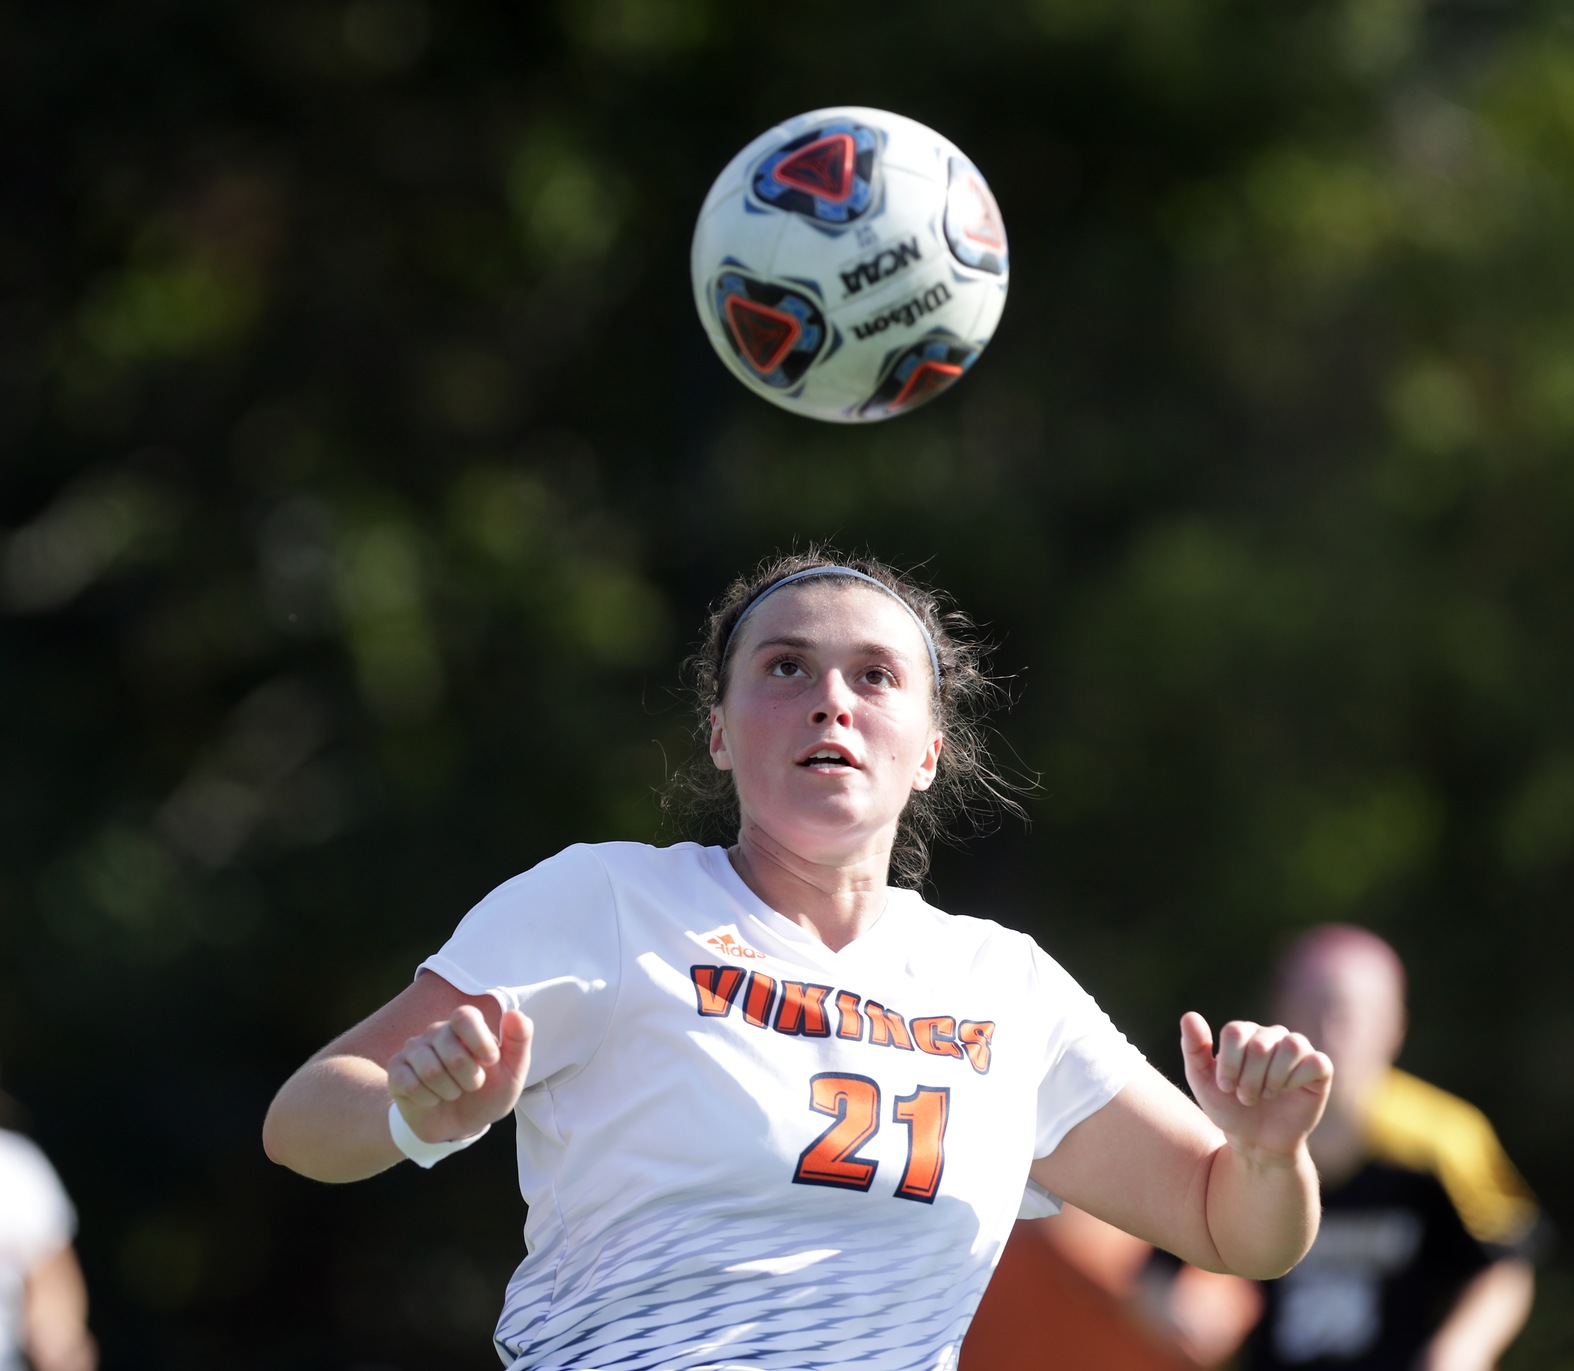 Vikings Advance to MASCAC Championship Game, Defeat Top Seed Worcester State In Penalty Shootout Win